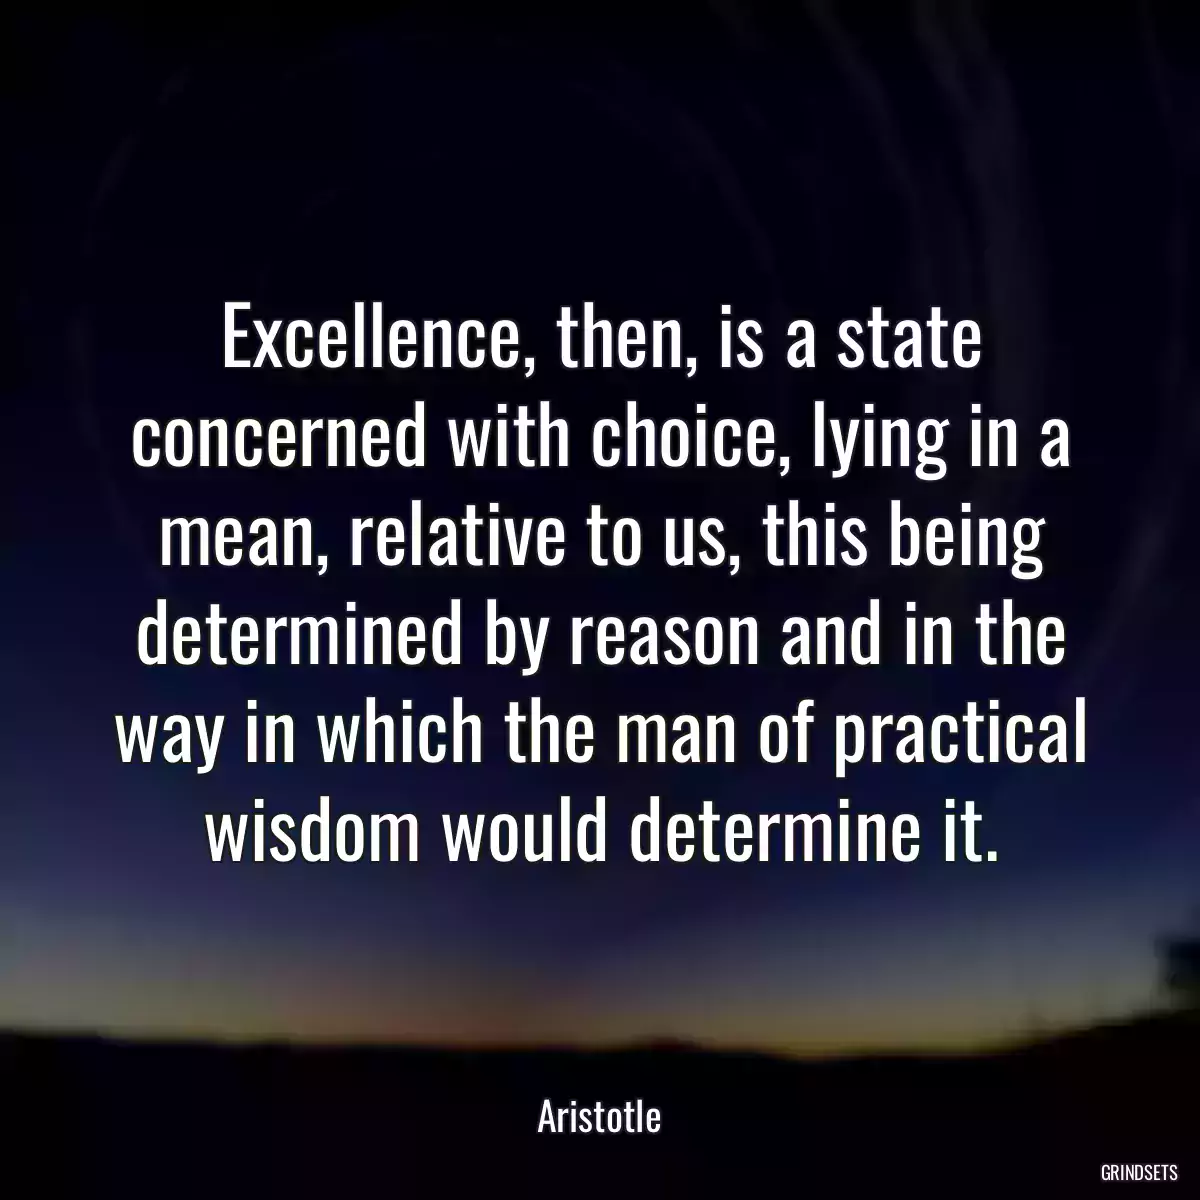 Excellence, then, is a state concerned with choice, lying in a mean, relative to us, this being determined by reason and in the way in which the man of practical wisdom would determine it.